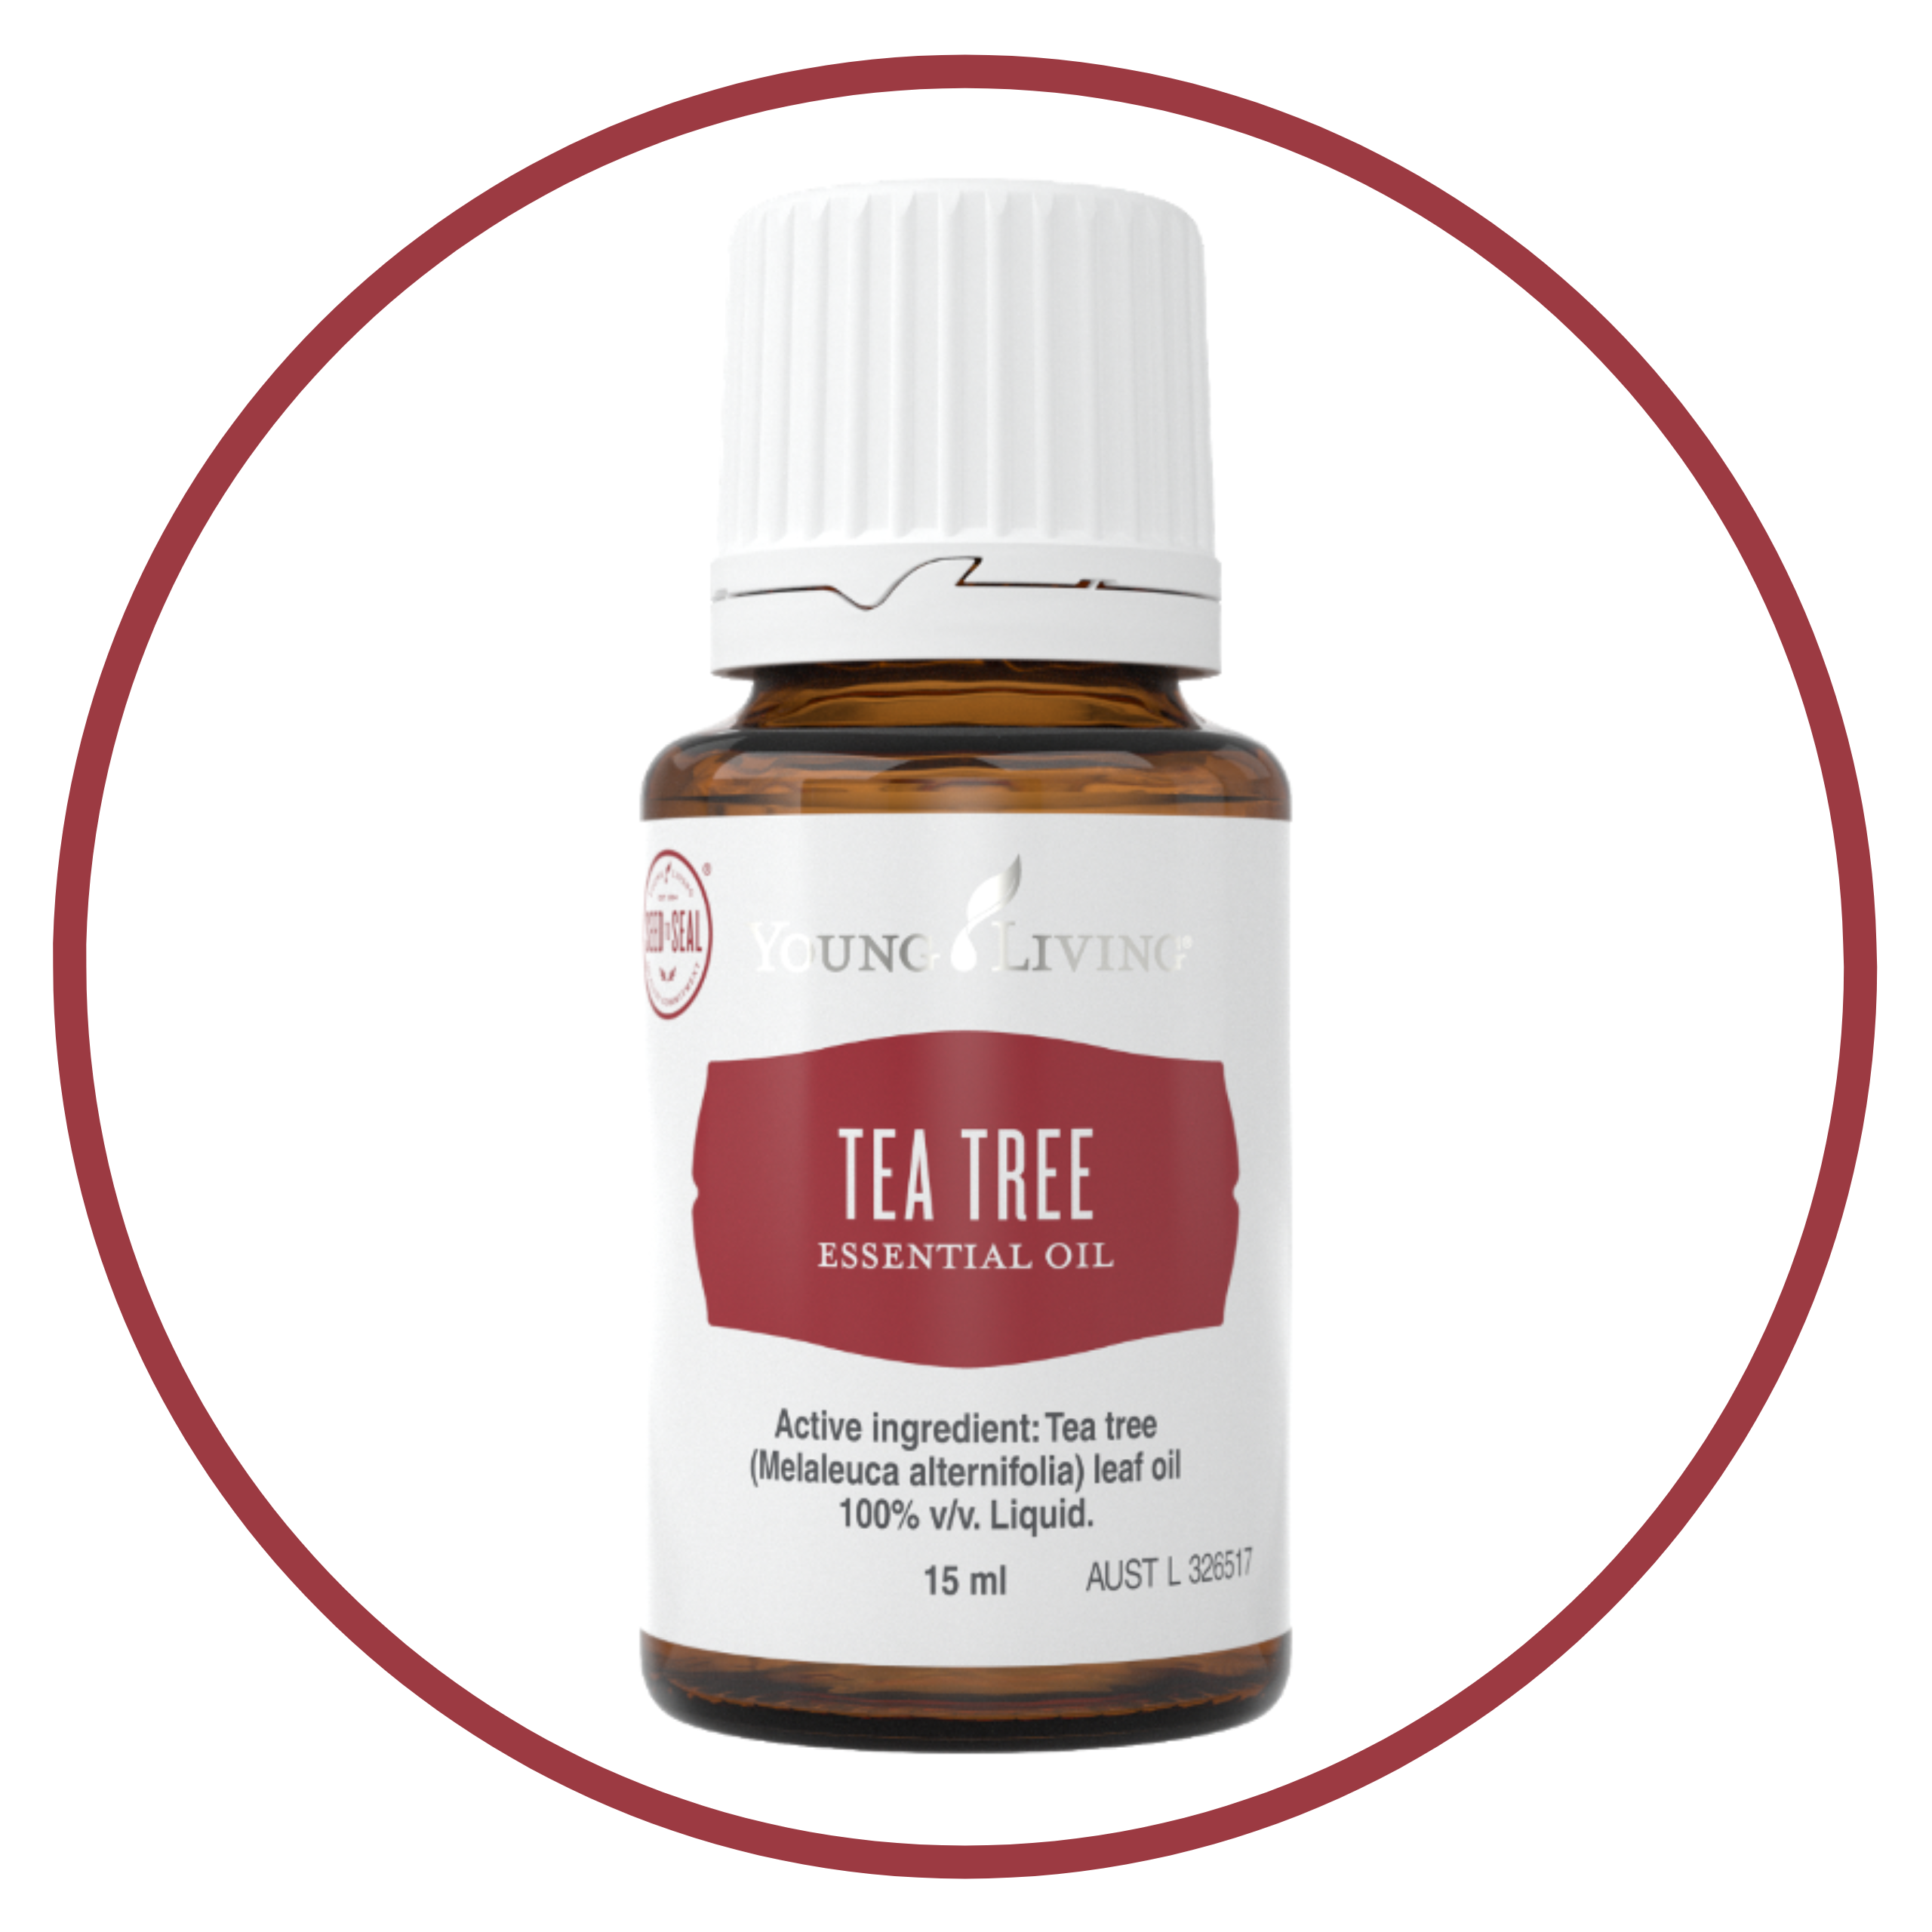 Image of Young Living 'Tea Tree' essential oil bottle